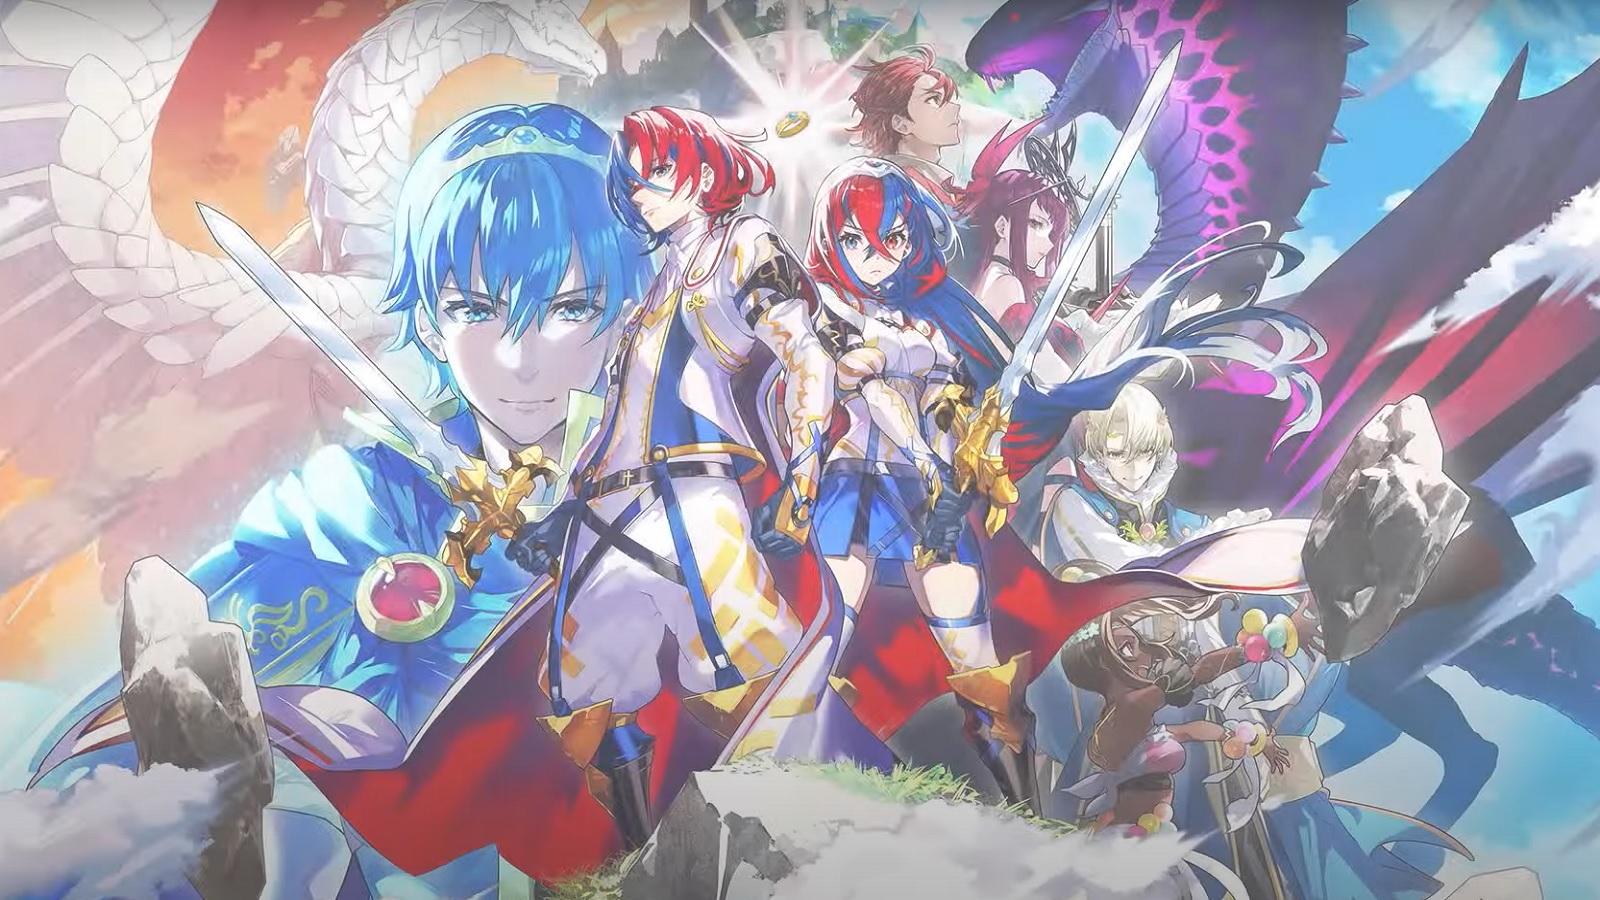 Fire Emblem Engage characters: All of the new and returning heroes